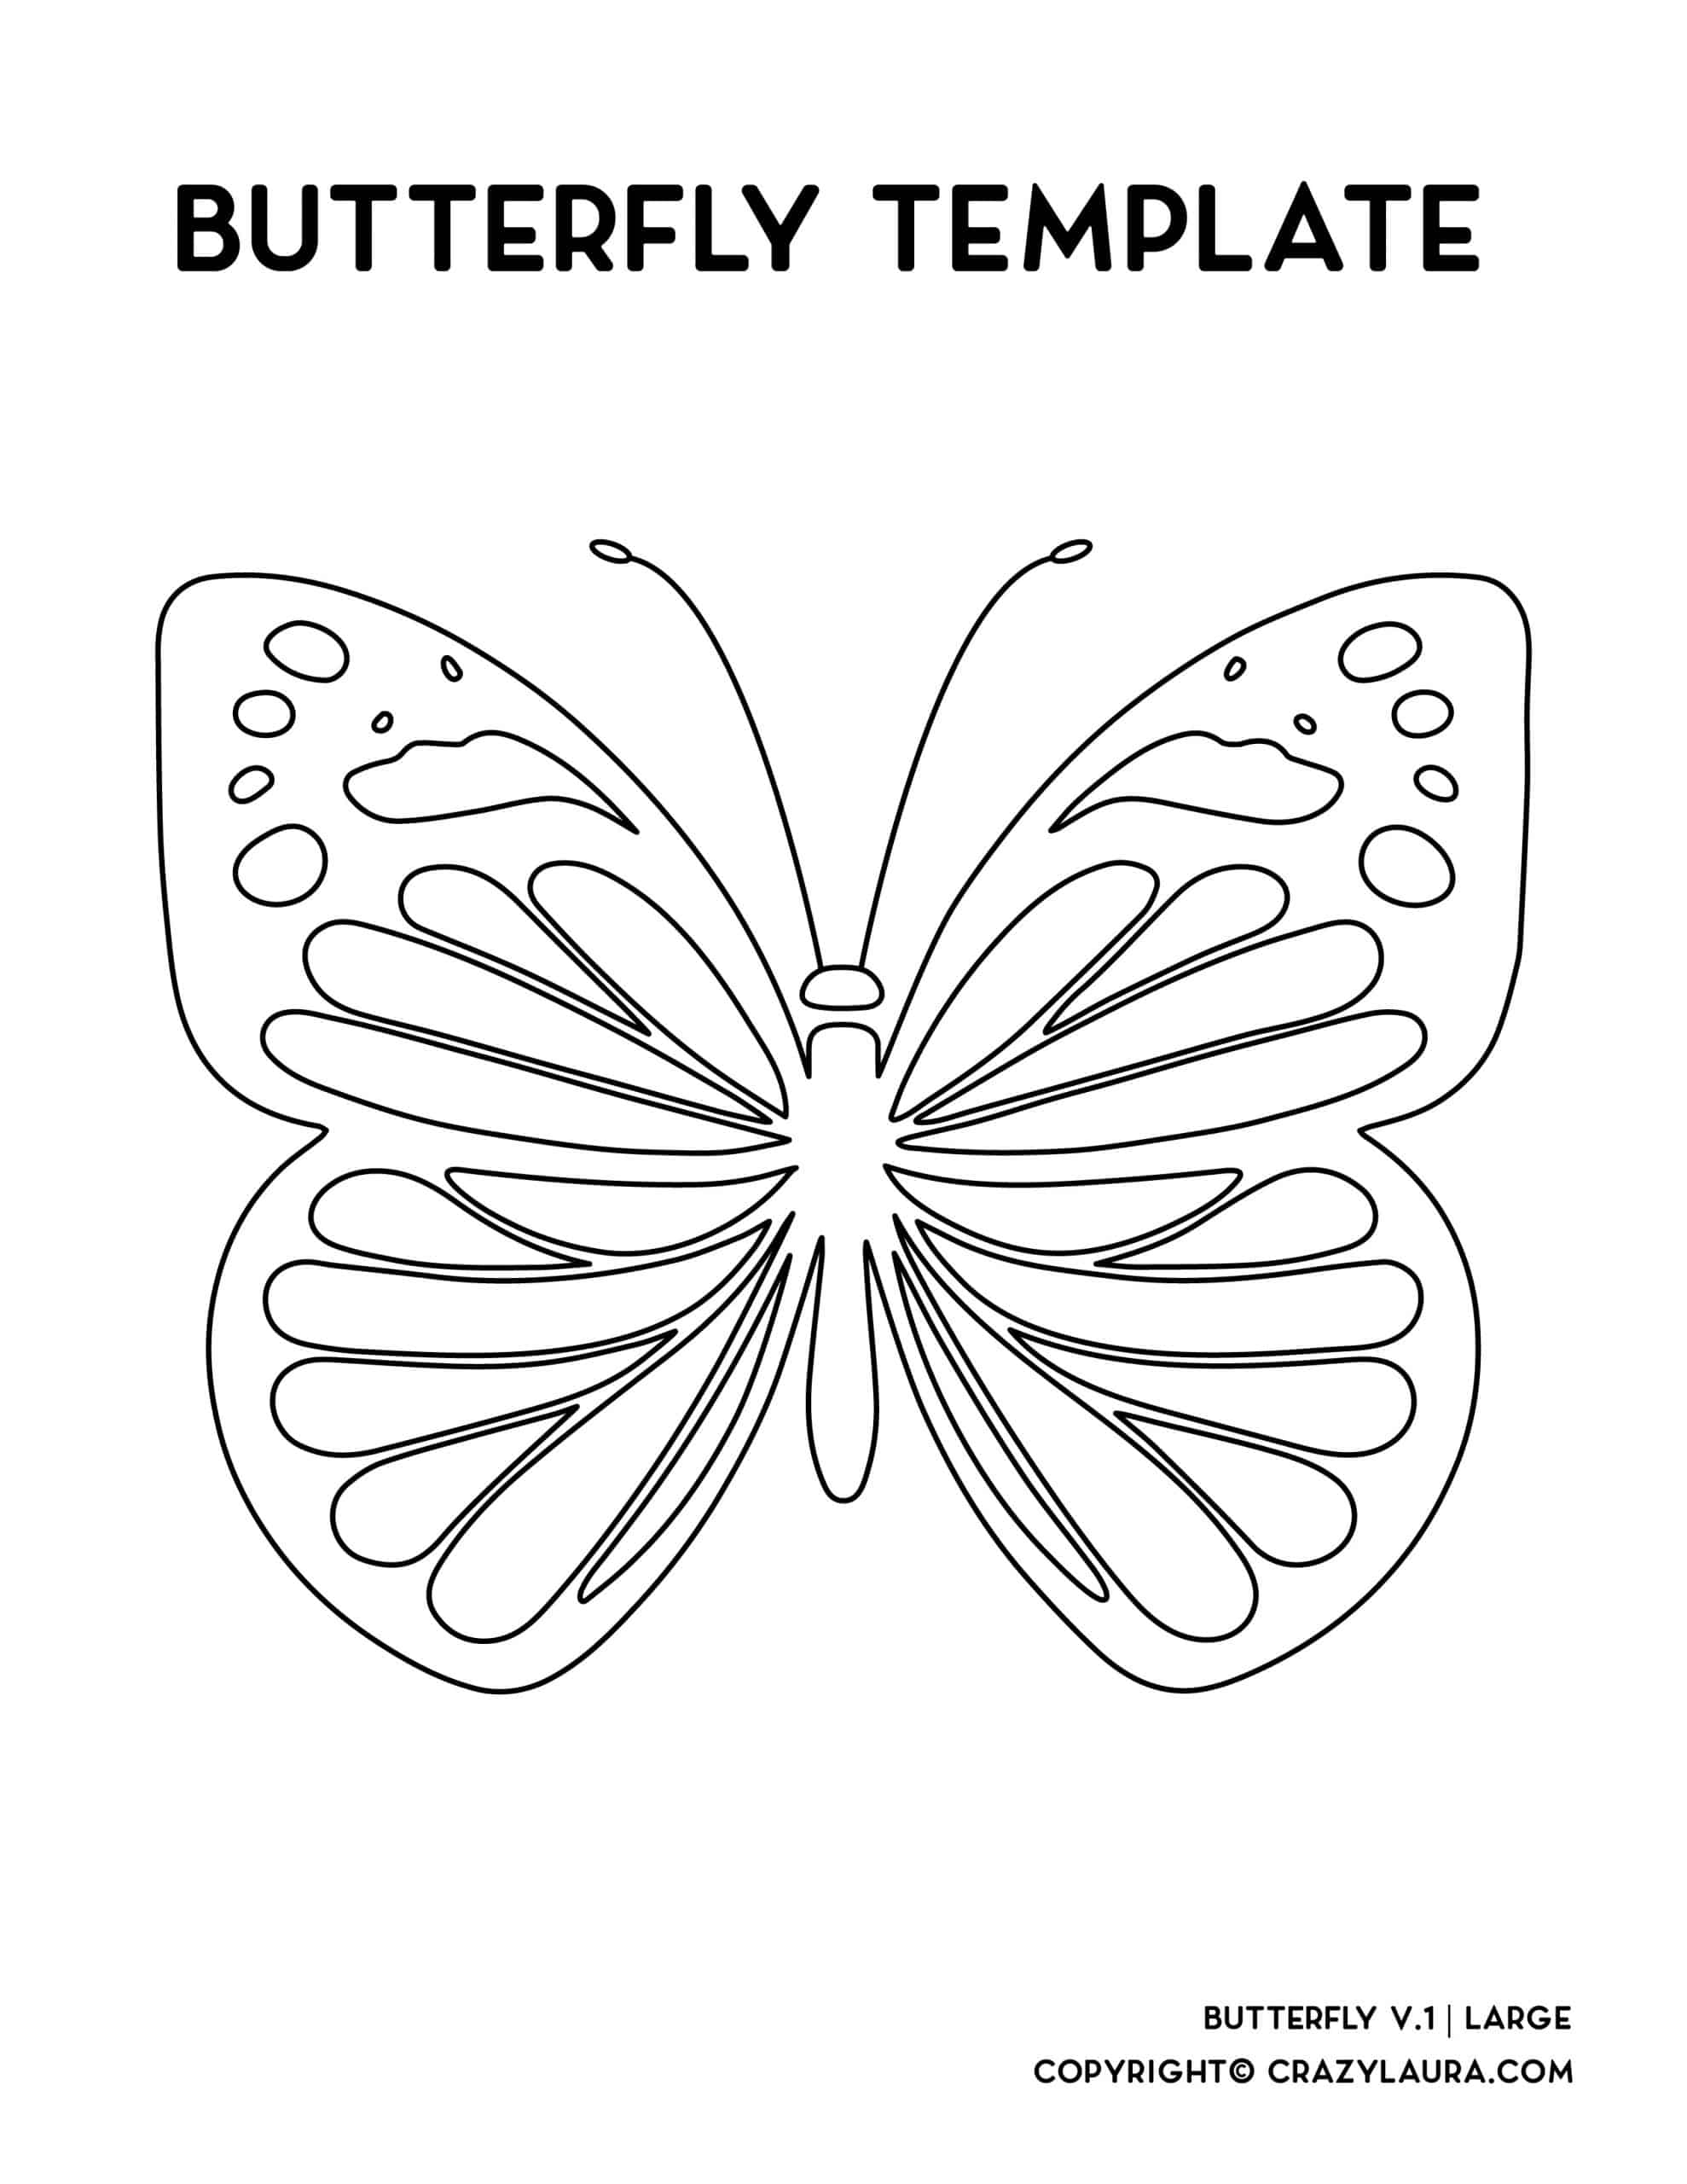 Free Butterfly Template Coloring Pages To Print Crazy Laura